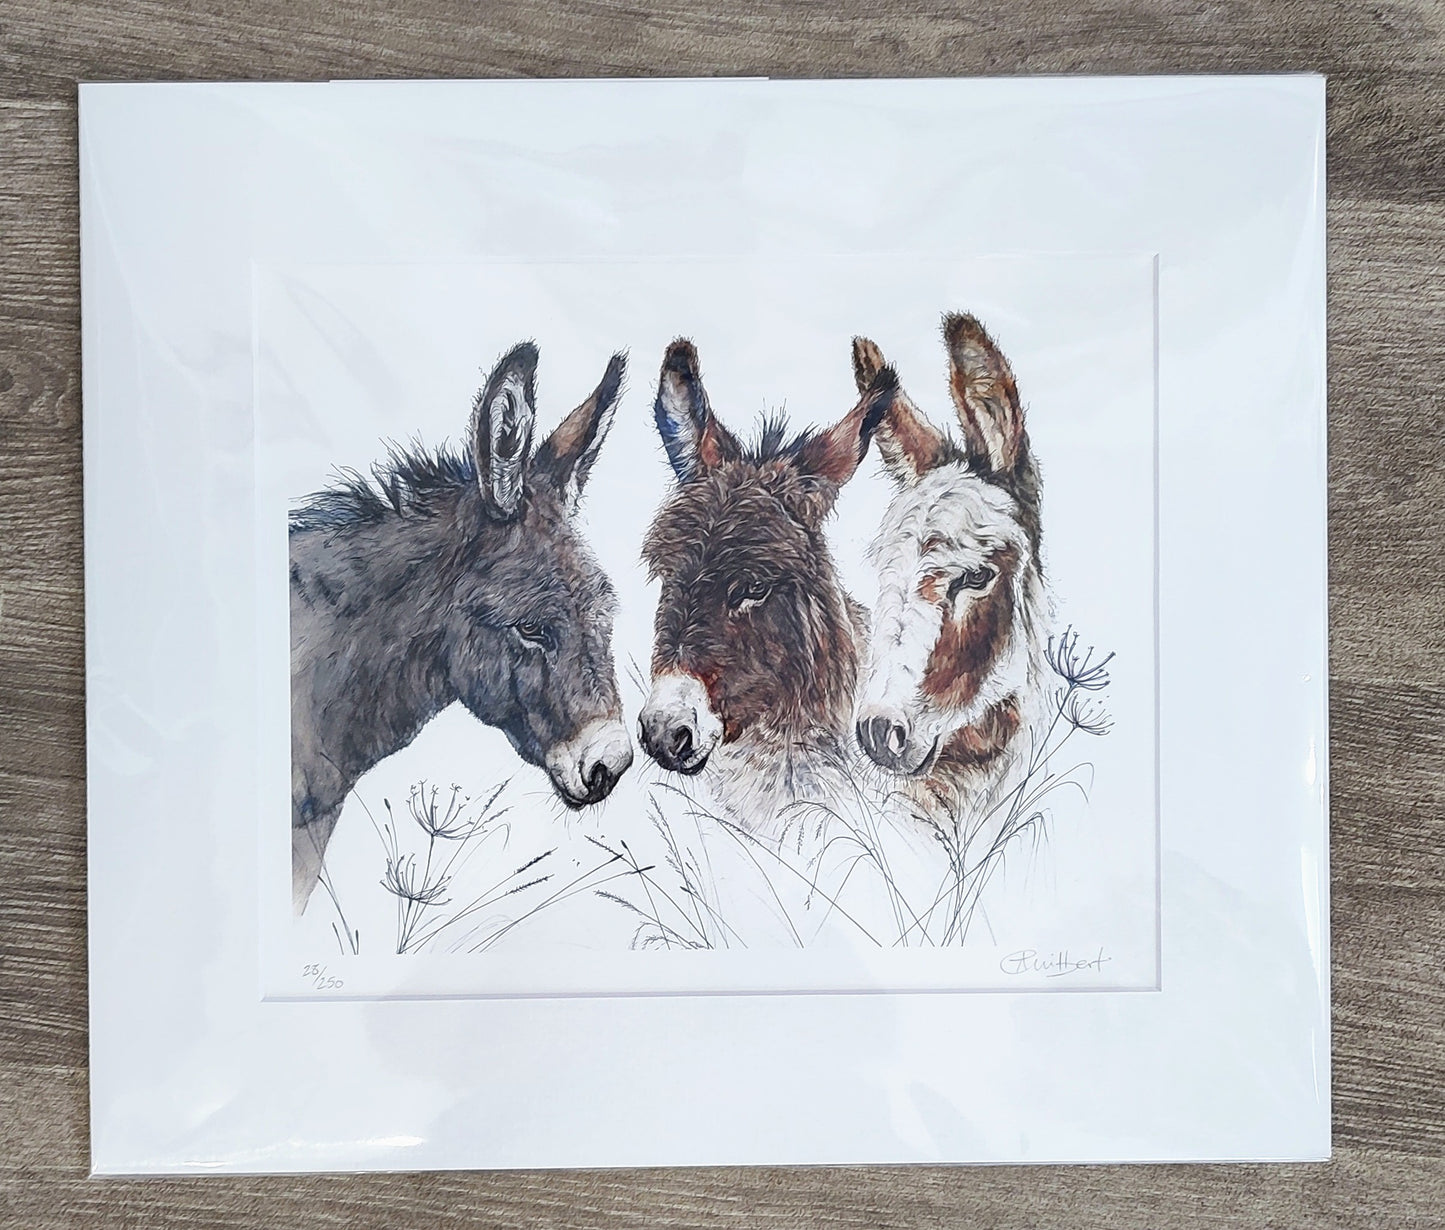 Copy of Anne Gilbert -George, Bridget and Annie, Cute limited Rdition print of Donkeys